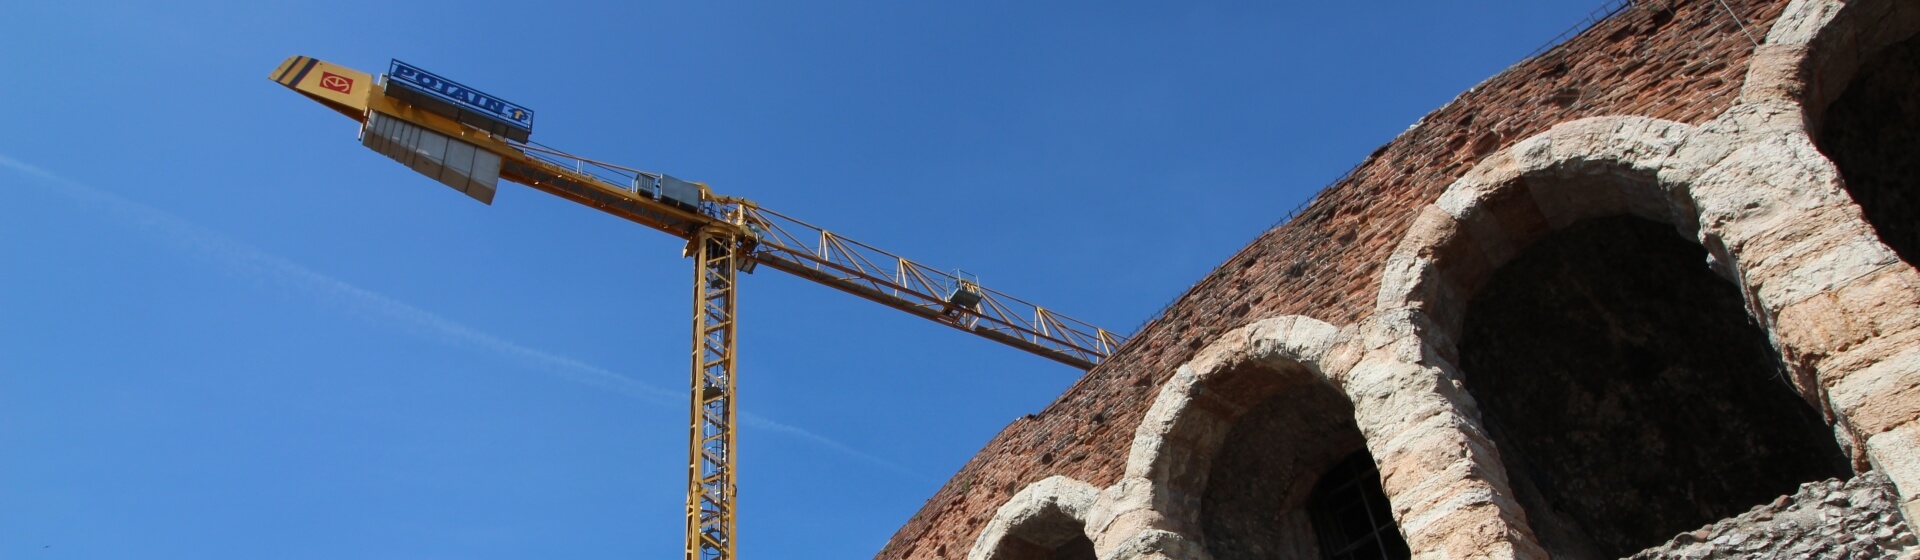 Potain MDT 98 plays a role in Verona Arena production